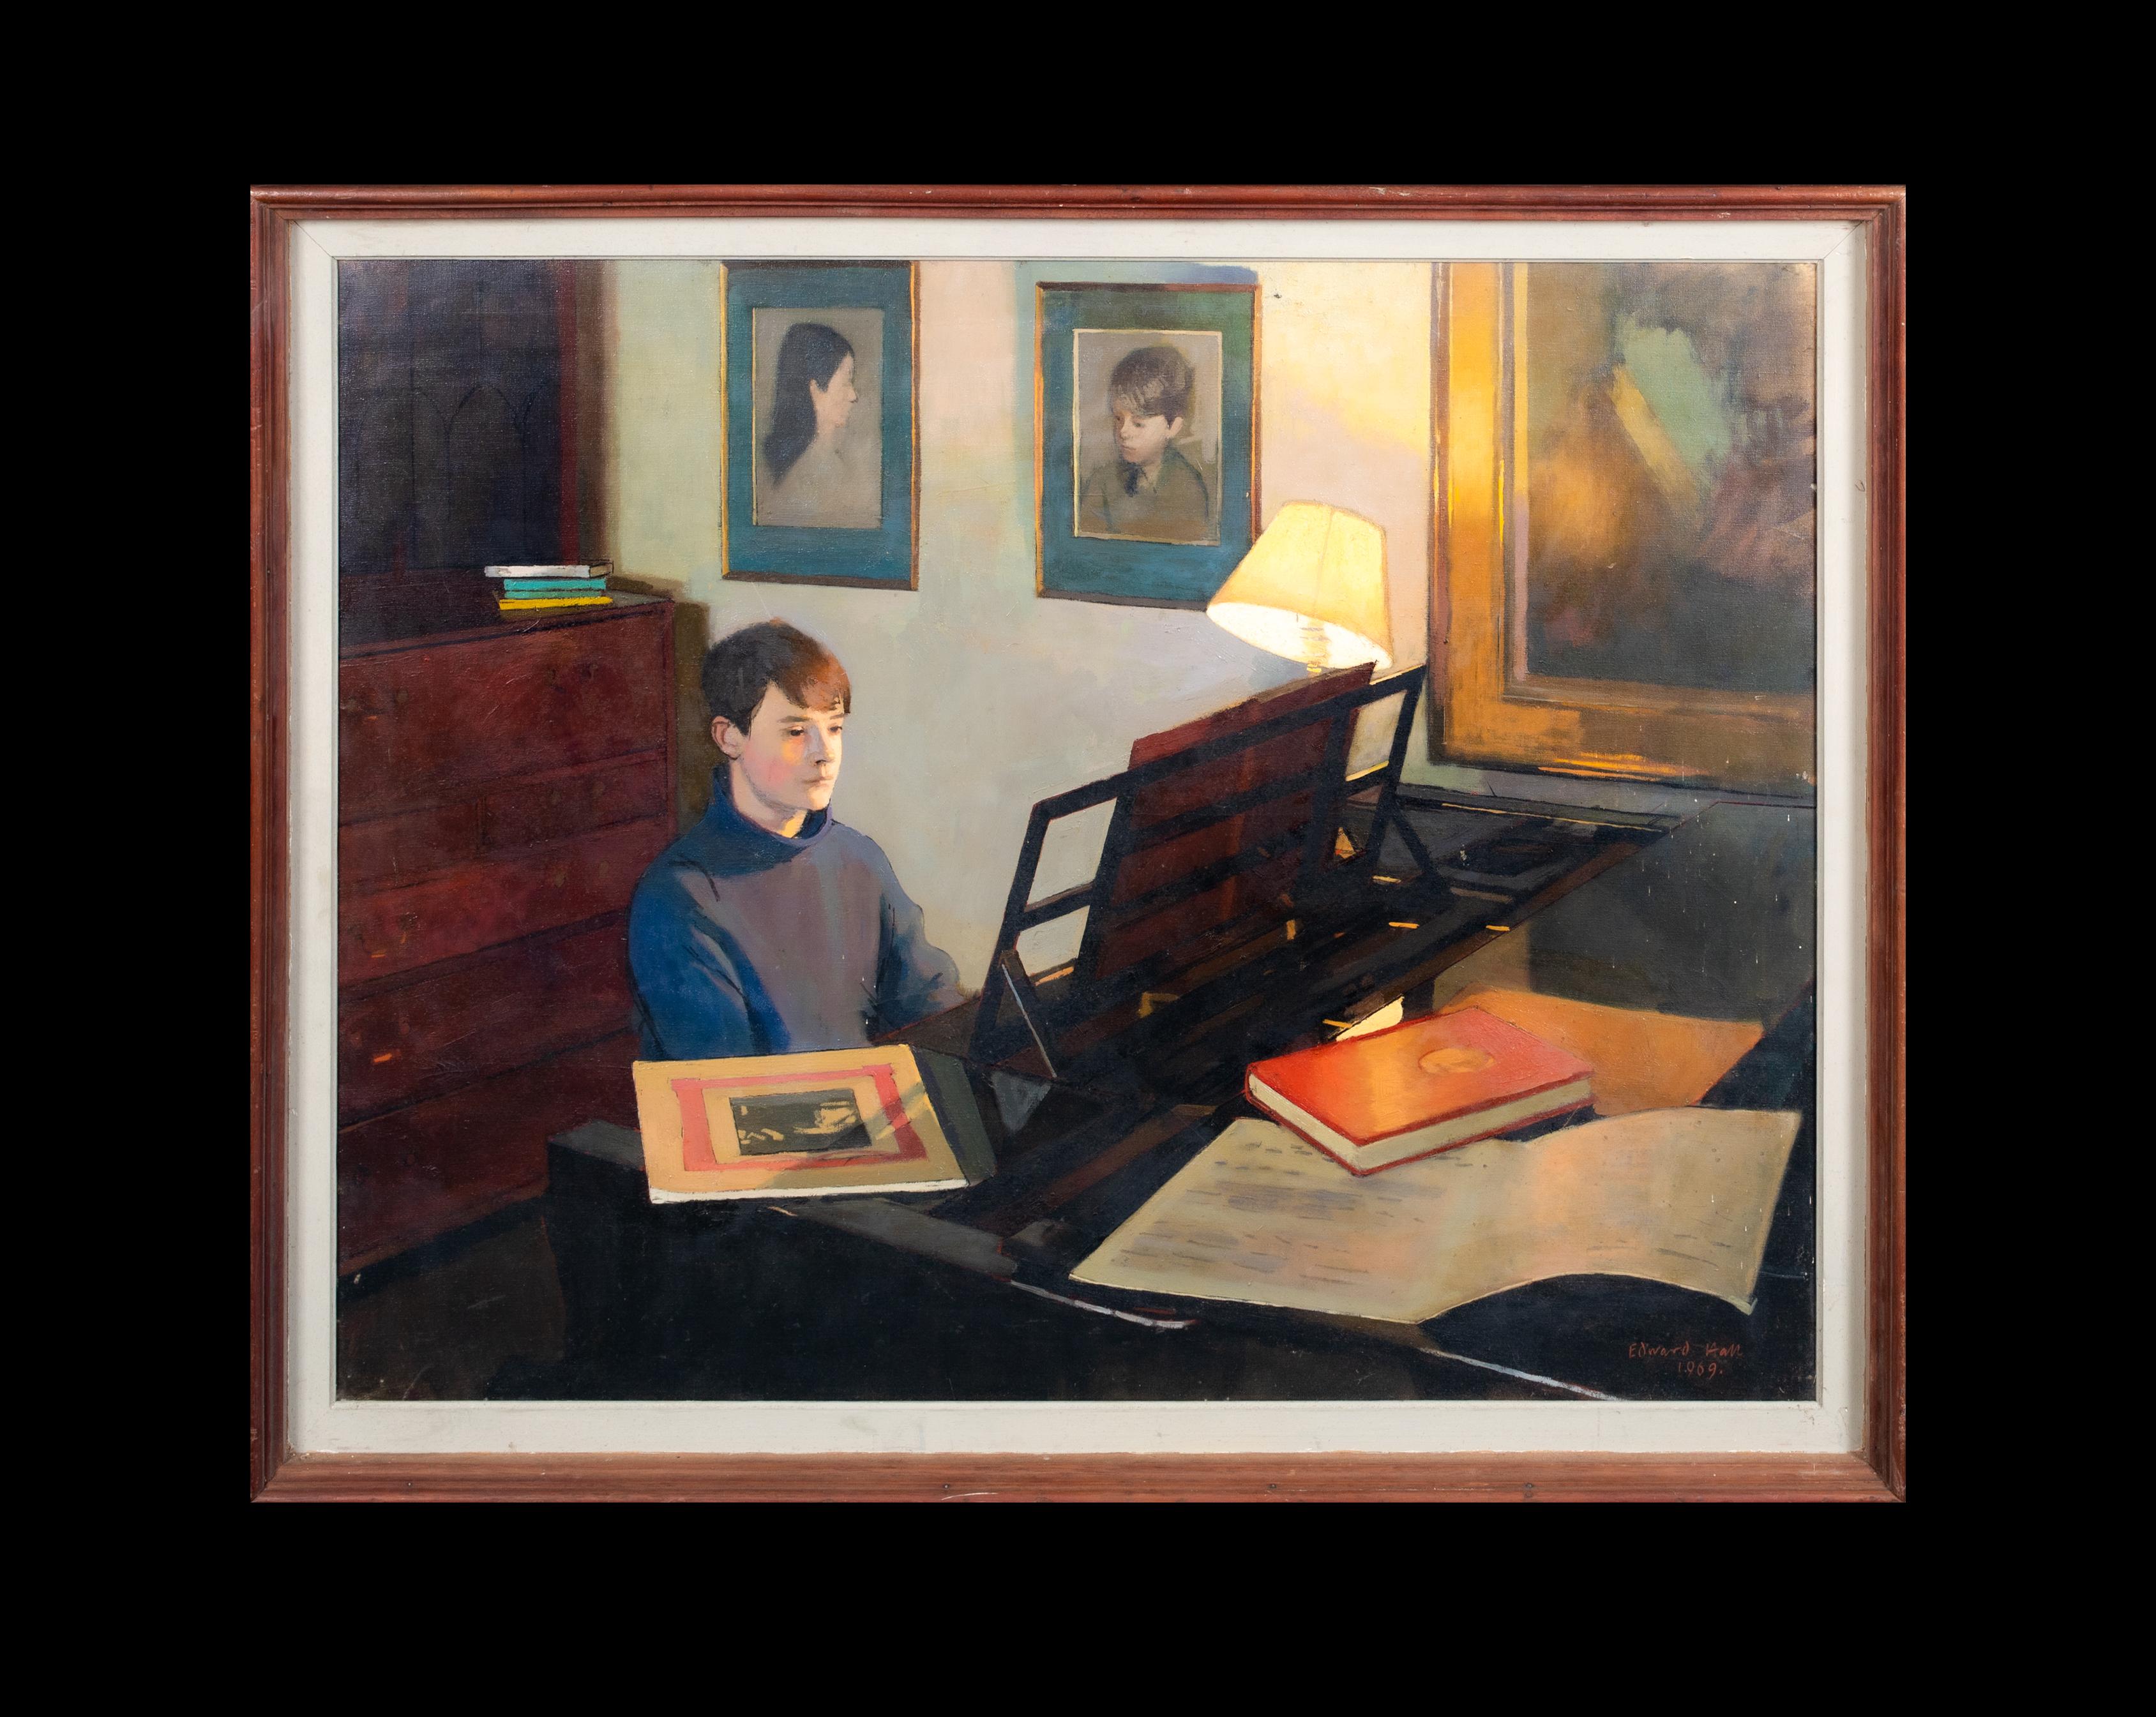 Matthew At The Piano, dated 1969  by EDWARD HALL (1922-1991) - Painting by Unknown